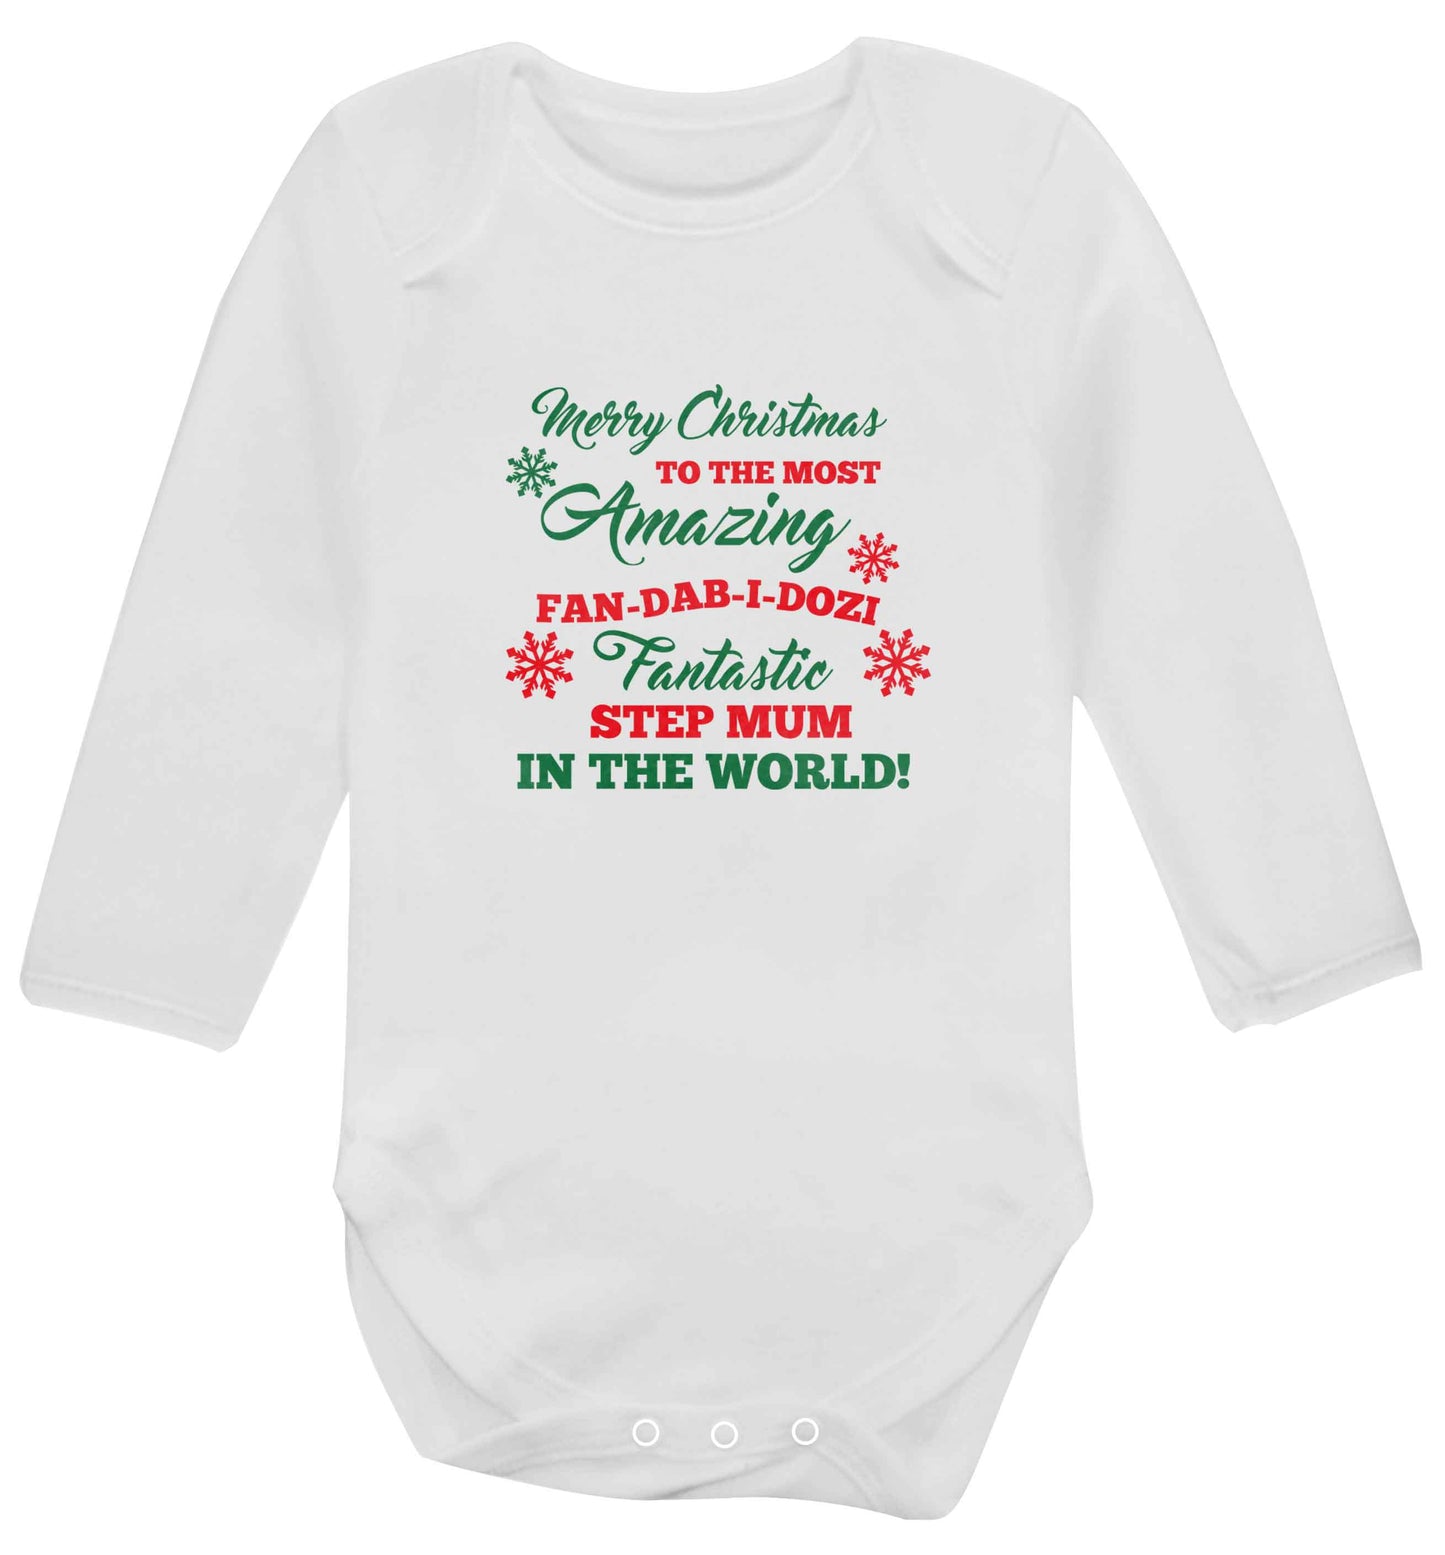 Merry Christmas to the most amazing fan-dab-i-dozi fantasic Step Mum in the world baby vest long sleeved white 6-12 months